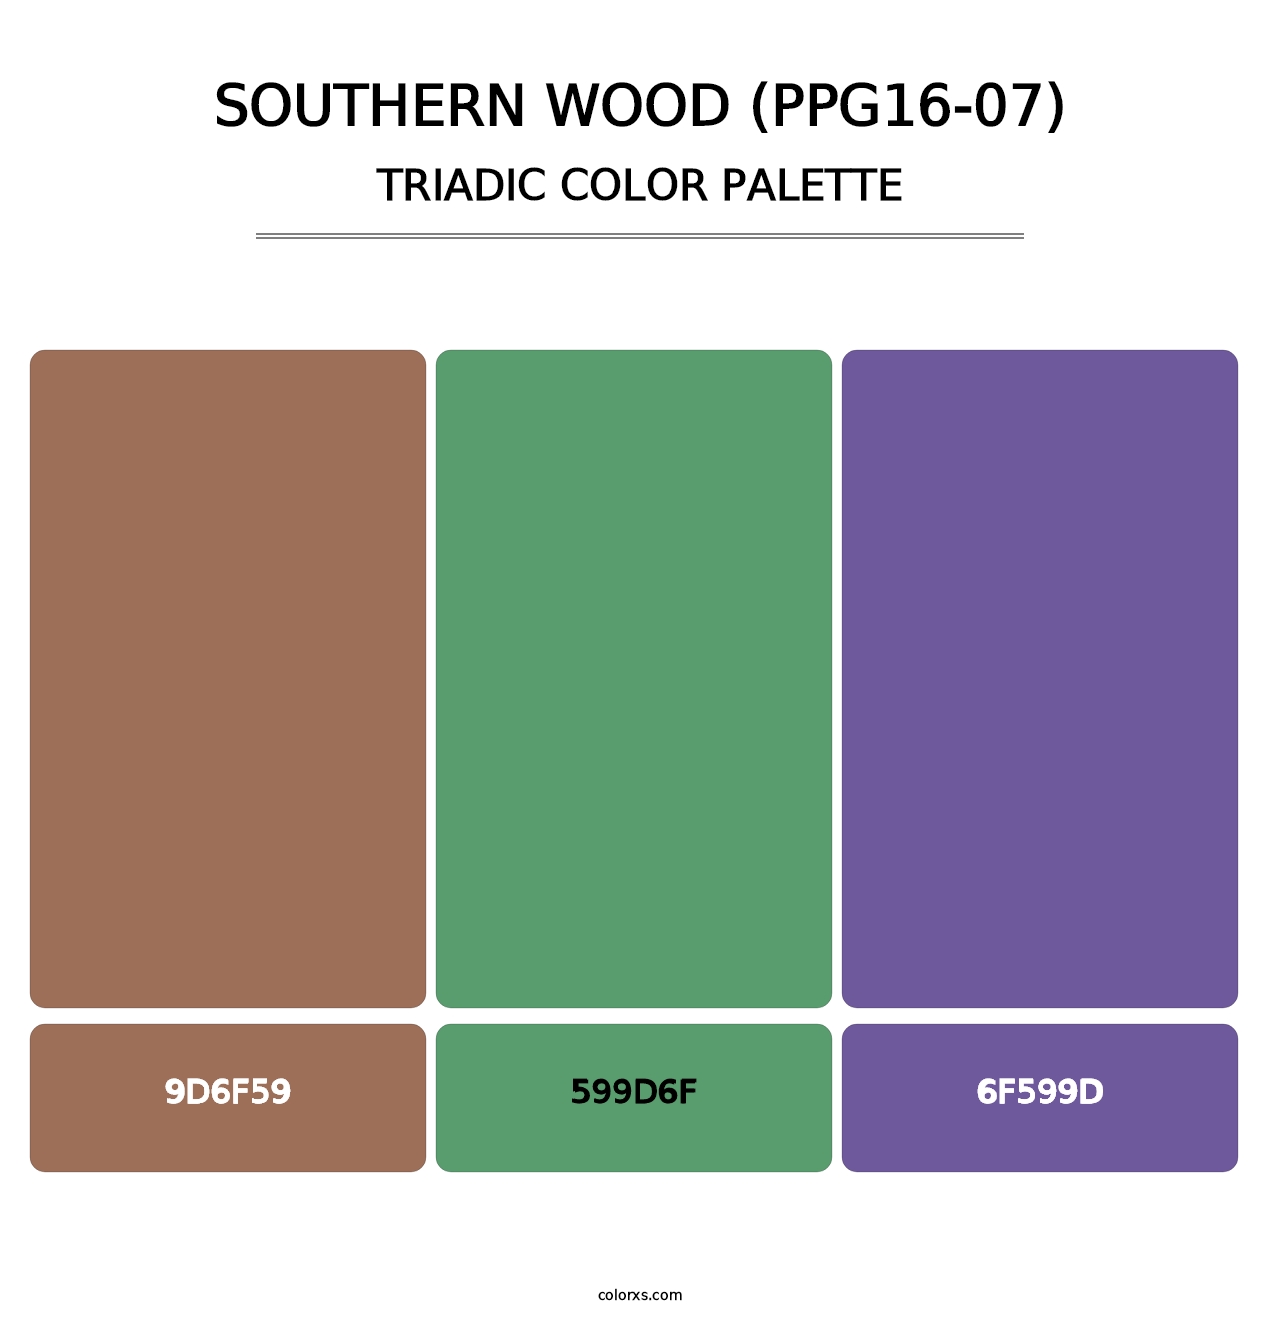 Southern Wood (PPG16-07) - Triadic Color Palette